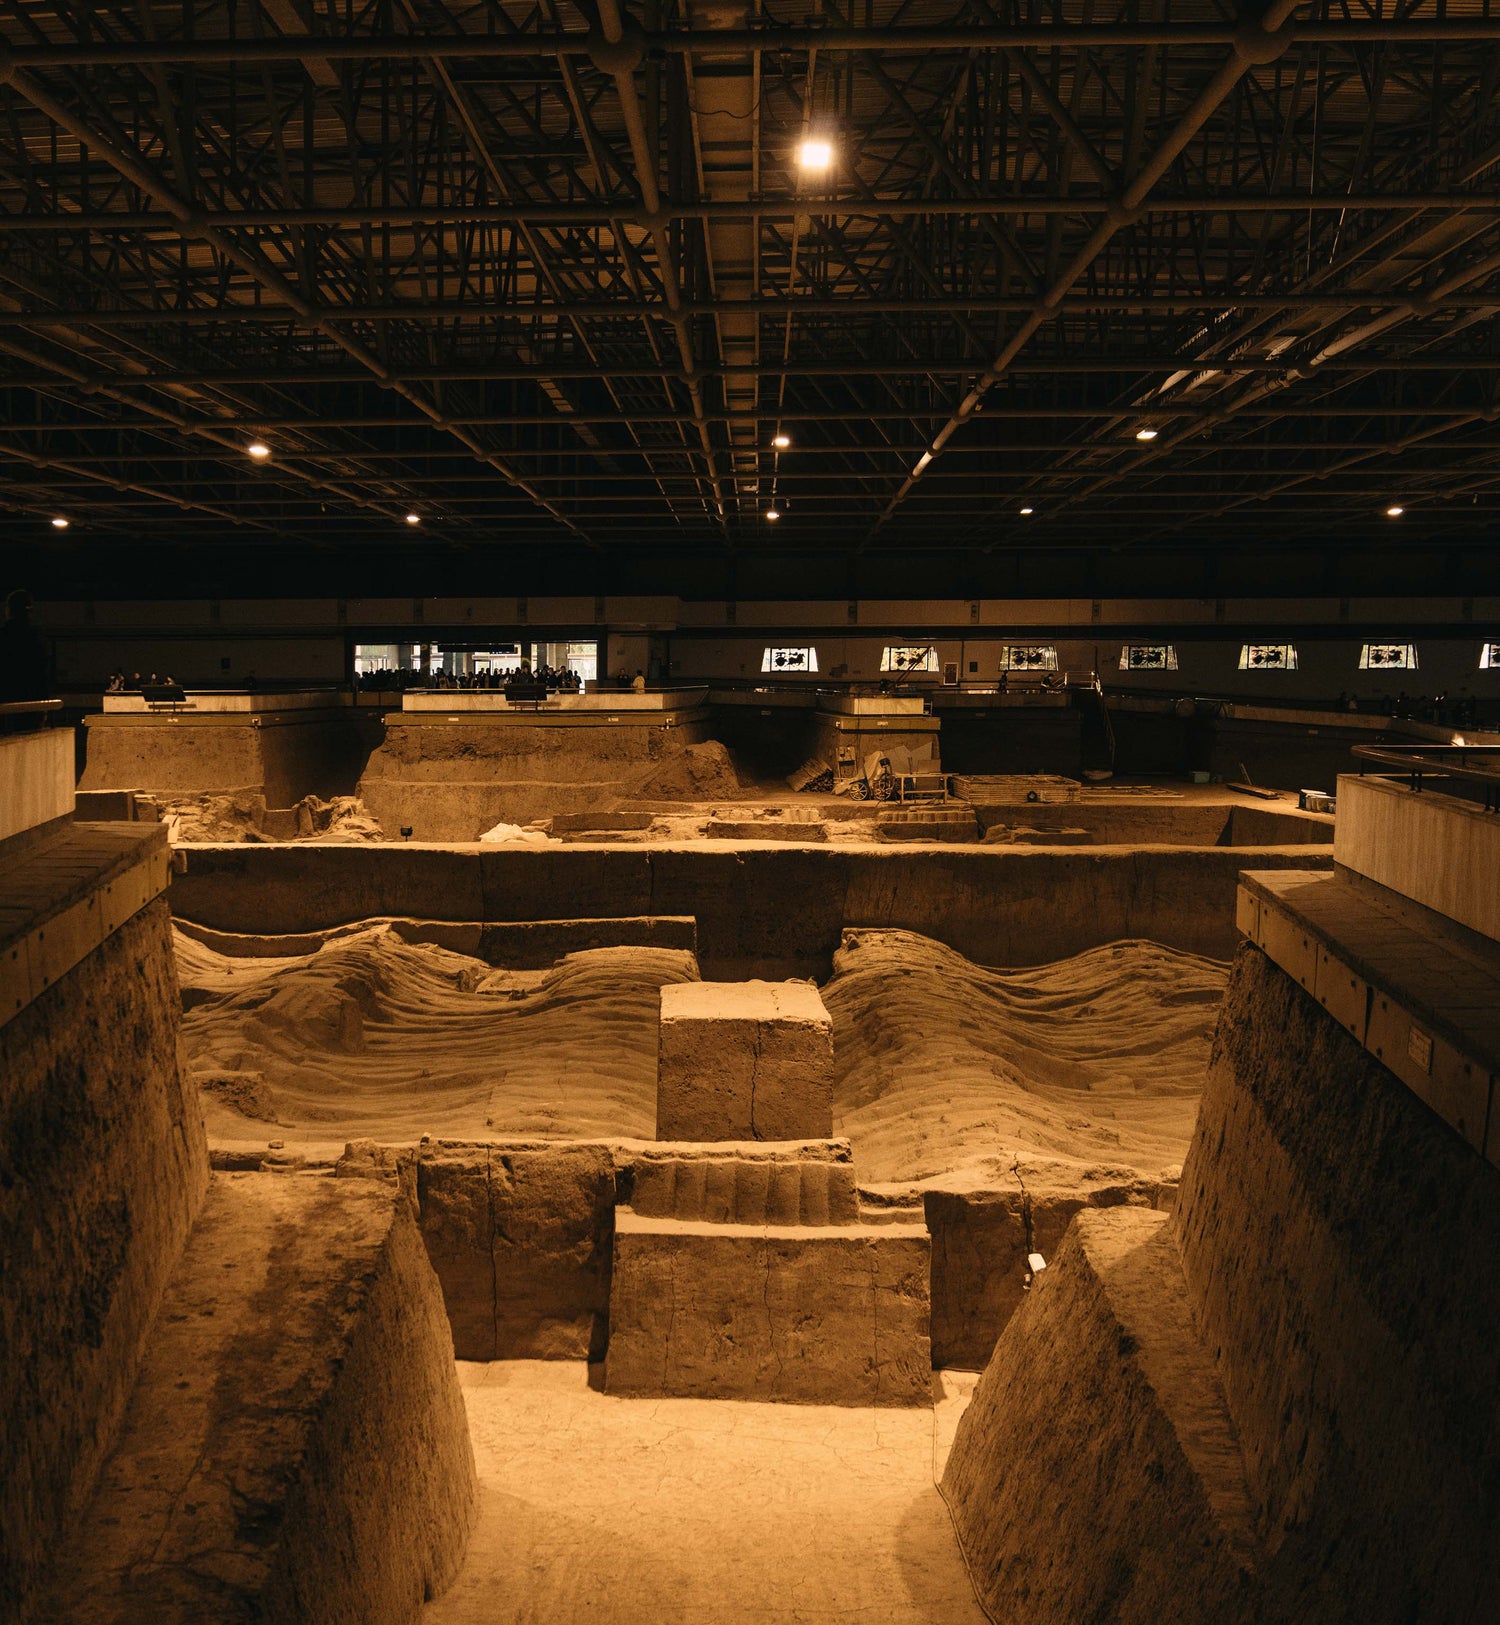 Clayarmy-terracotta army-Reputed as the eighth wonder of the world, Terracotta Army was crafted by Emperor Qinshihuang over 2,200 years ago. Explore this archaeological marvel with ClayArmy, now accessible to the public since 1979.